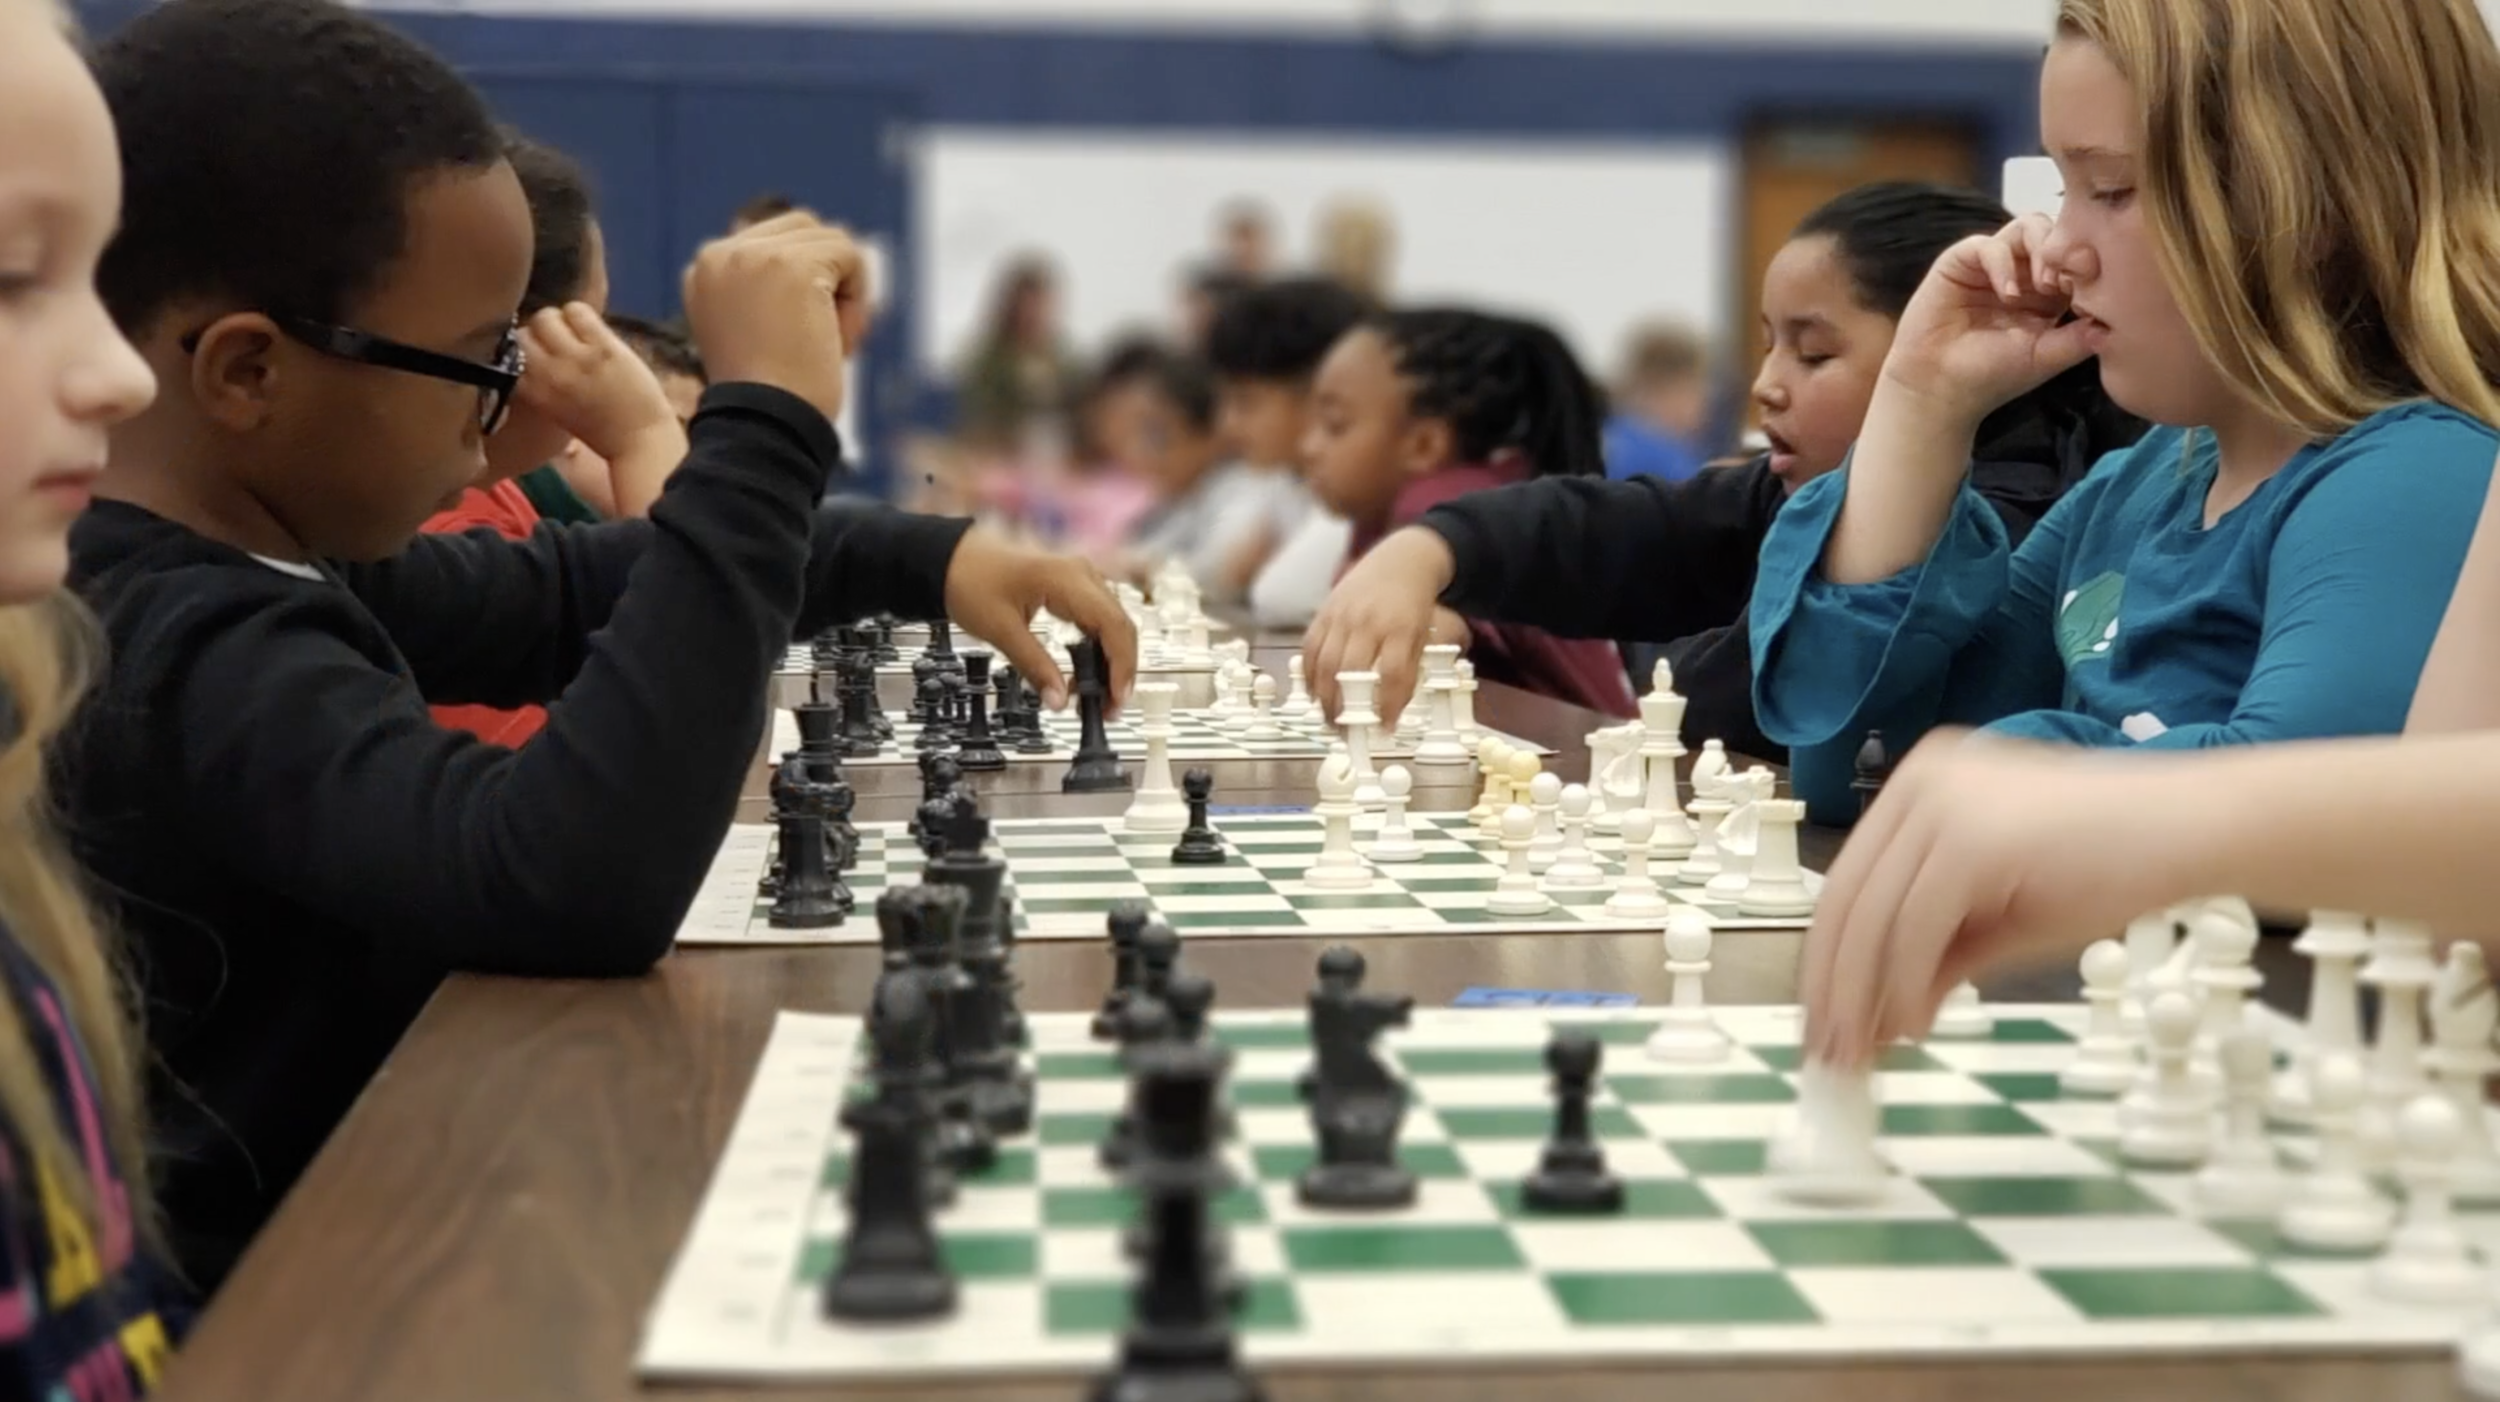 Get in the game: LINC K-12 chess tournament returns in-person March 5 —  Local Investment Commission